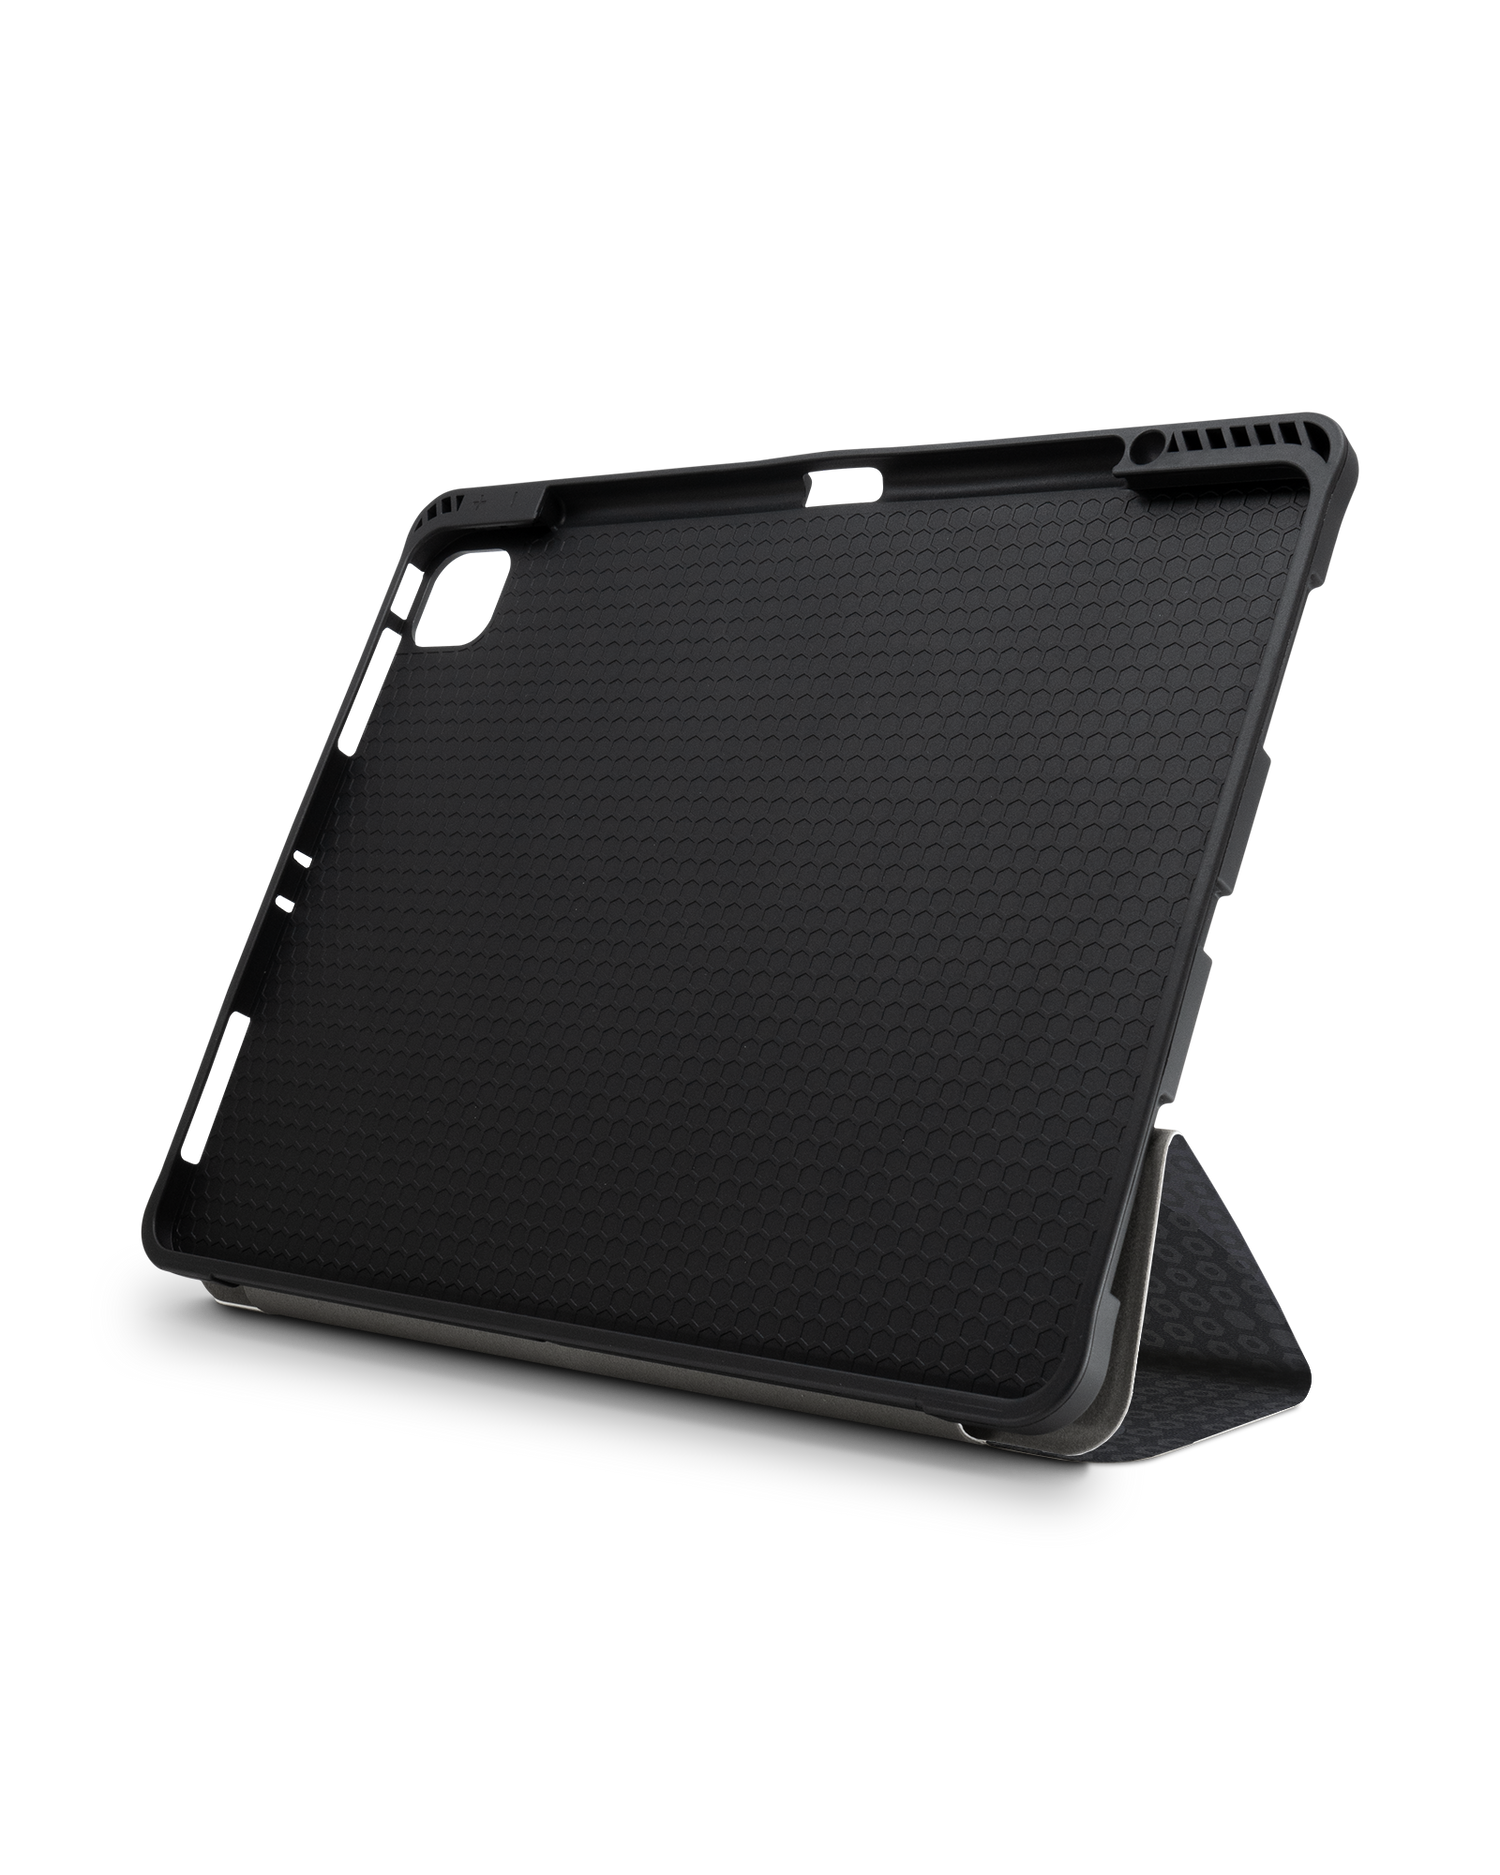 Spec Ops Dark iPad Case with Pencil Holder for Apple iPad Pro 6 12.9